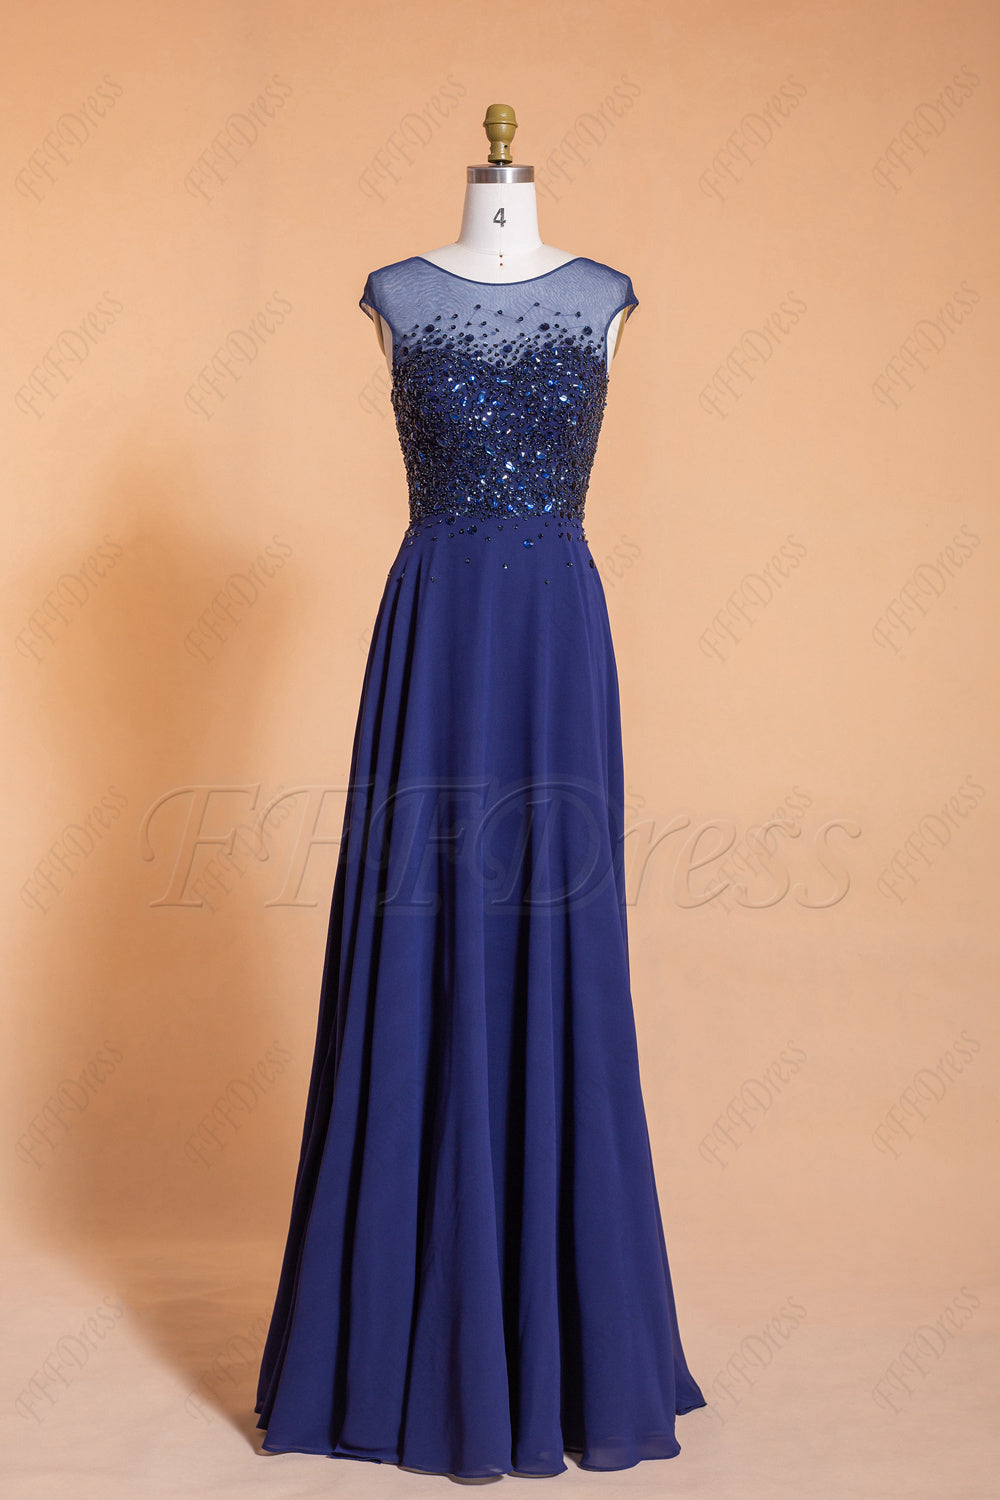 Beaded Modest Sparkly Navy Prom Dresses Long Cap Sleeves